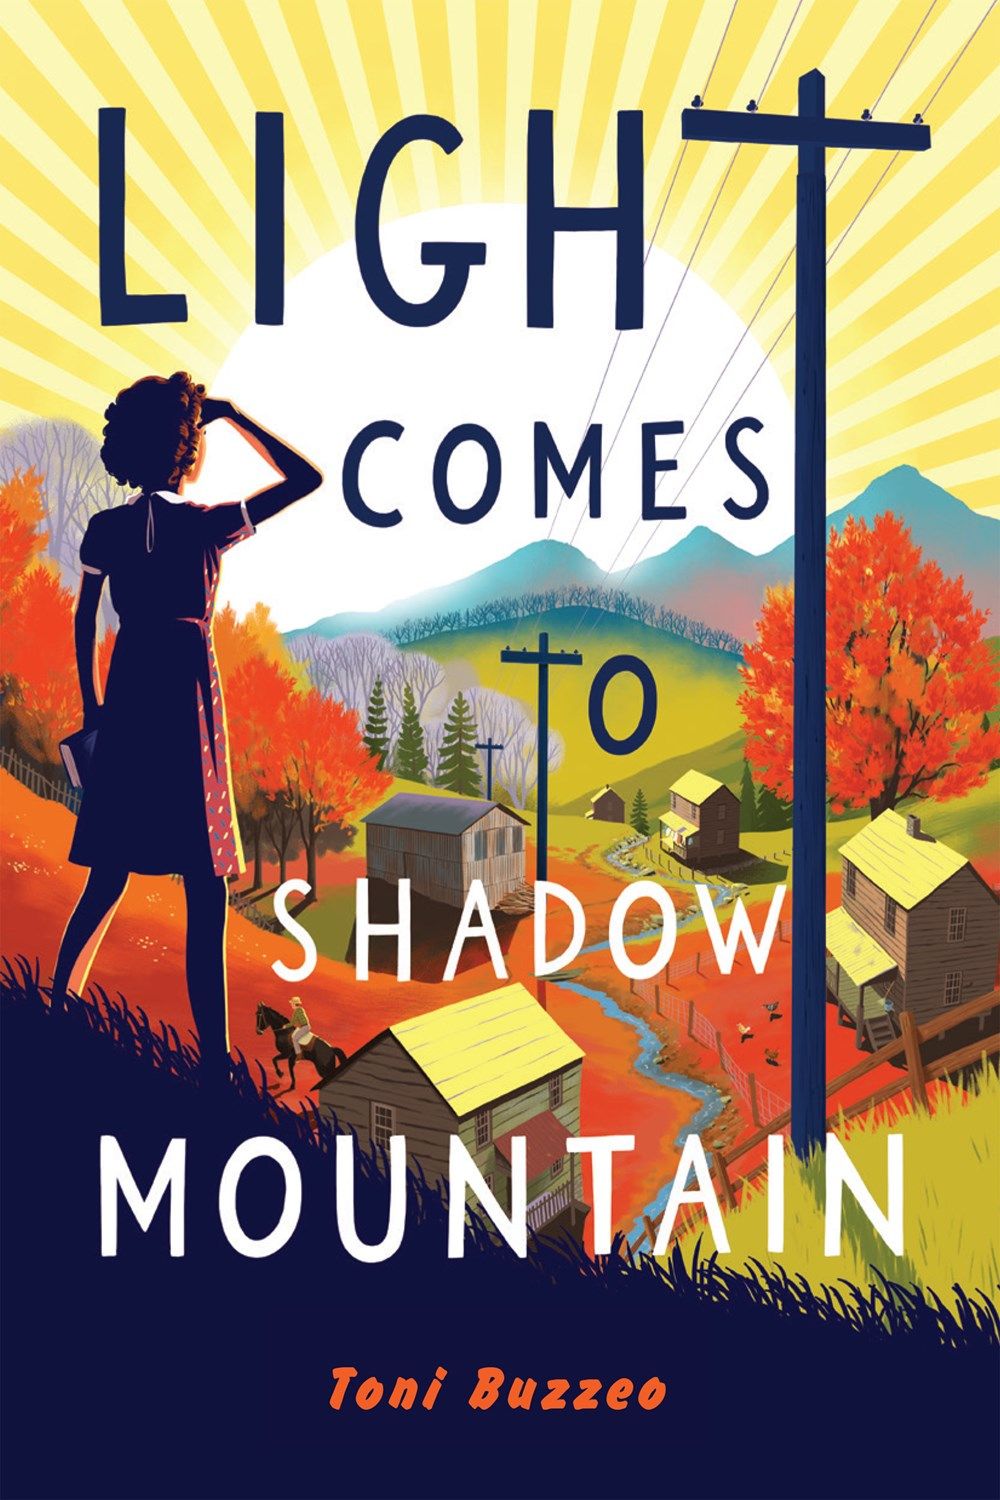 Cover of Light Comes to Shadow Mountain by Buzzeo